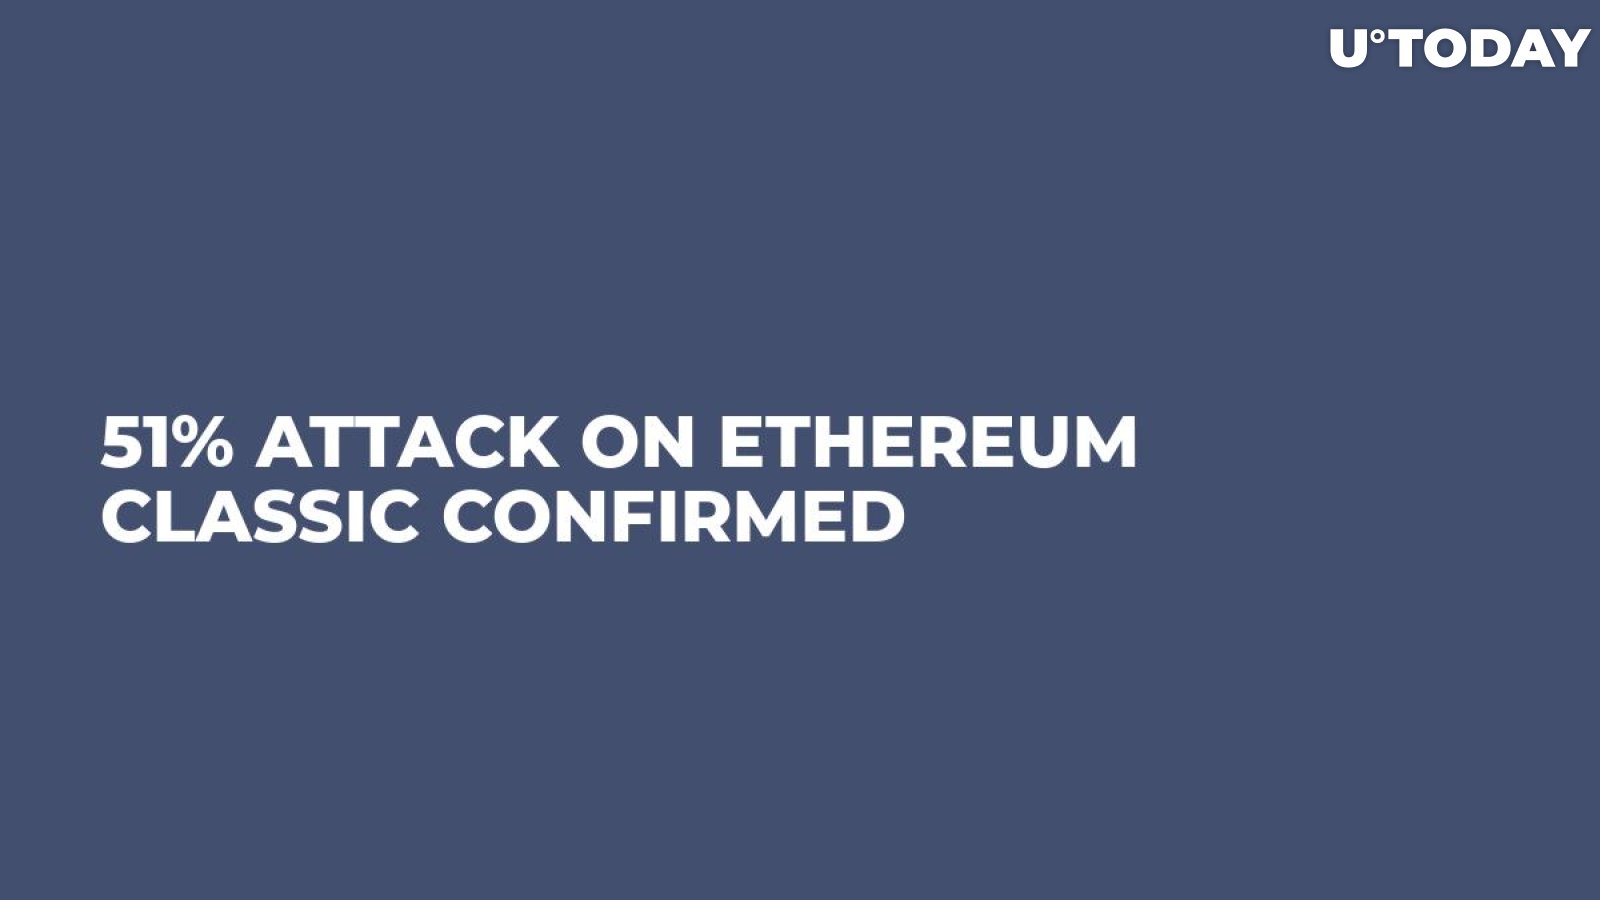 51% Attack on Ethereum Classic Confirmed